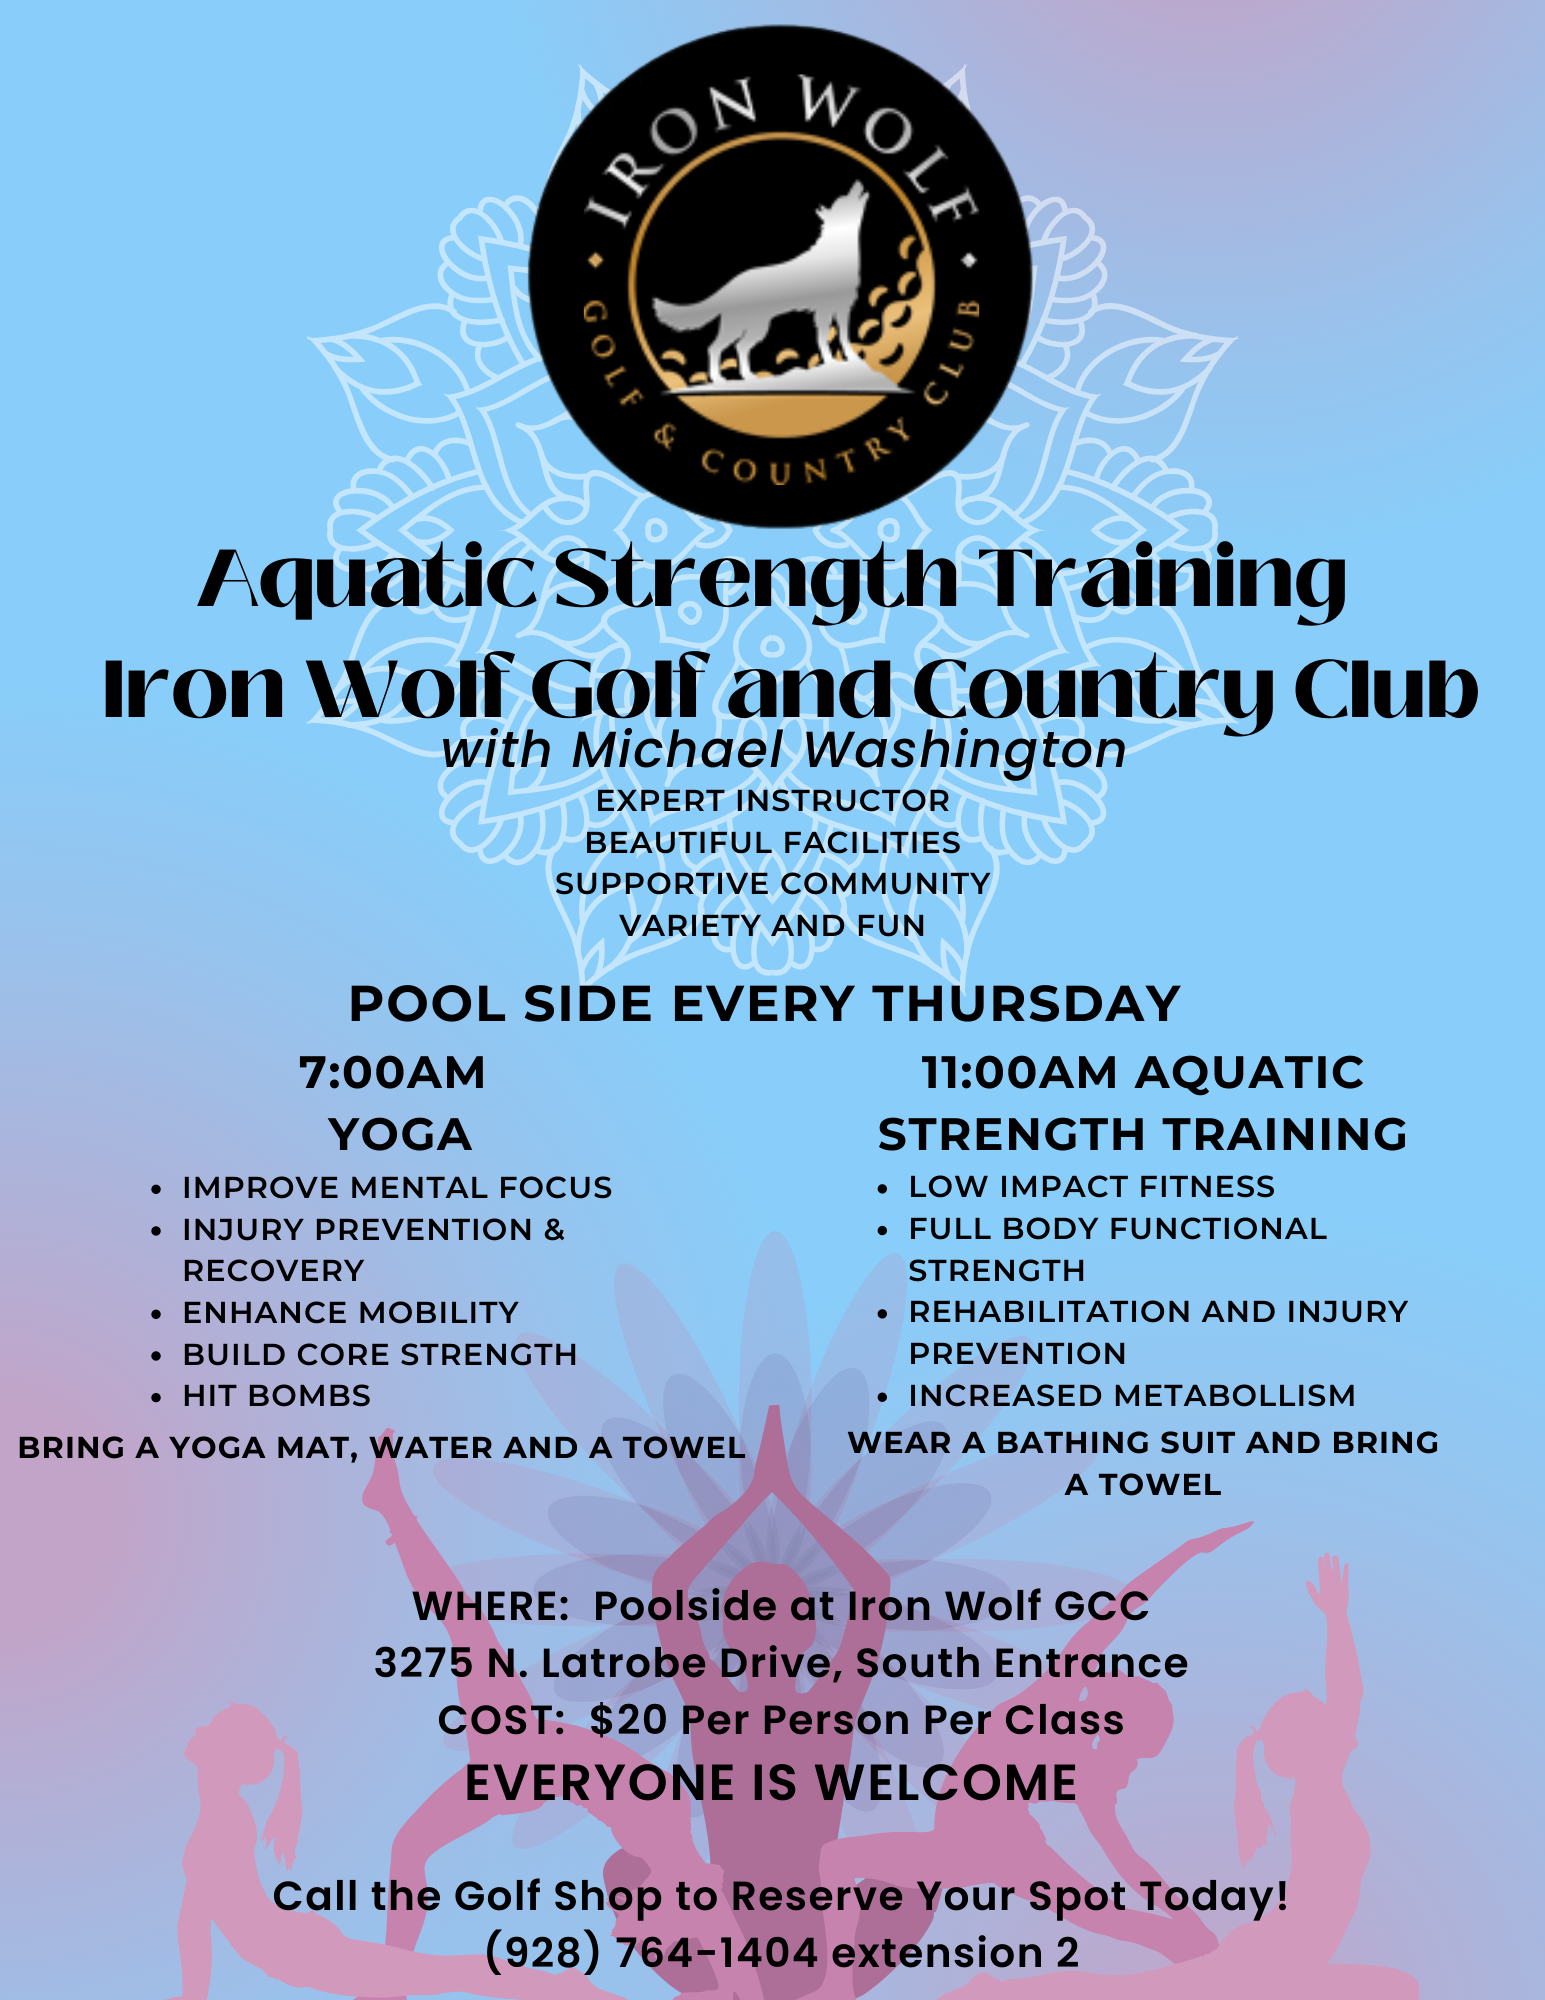 Yoga and Aquatic Strength Training at the Iron Wolf Golf and Country Club